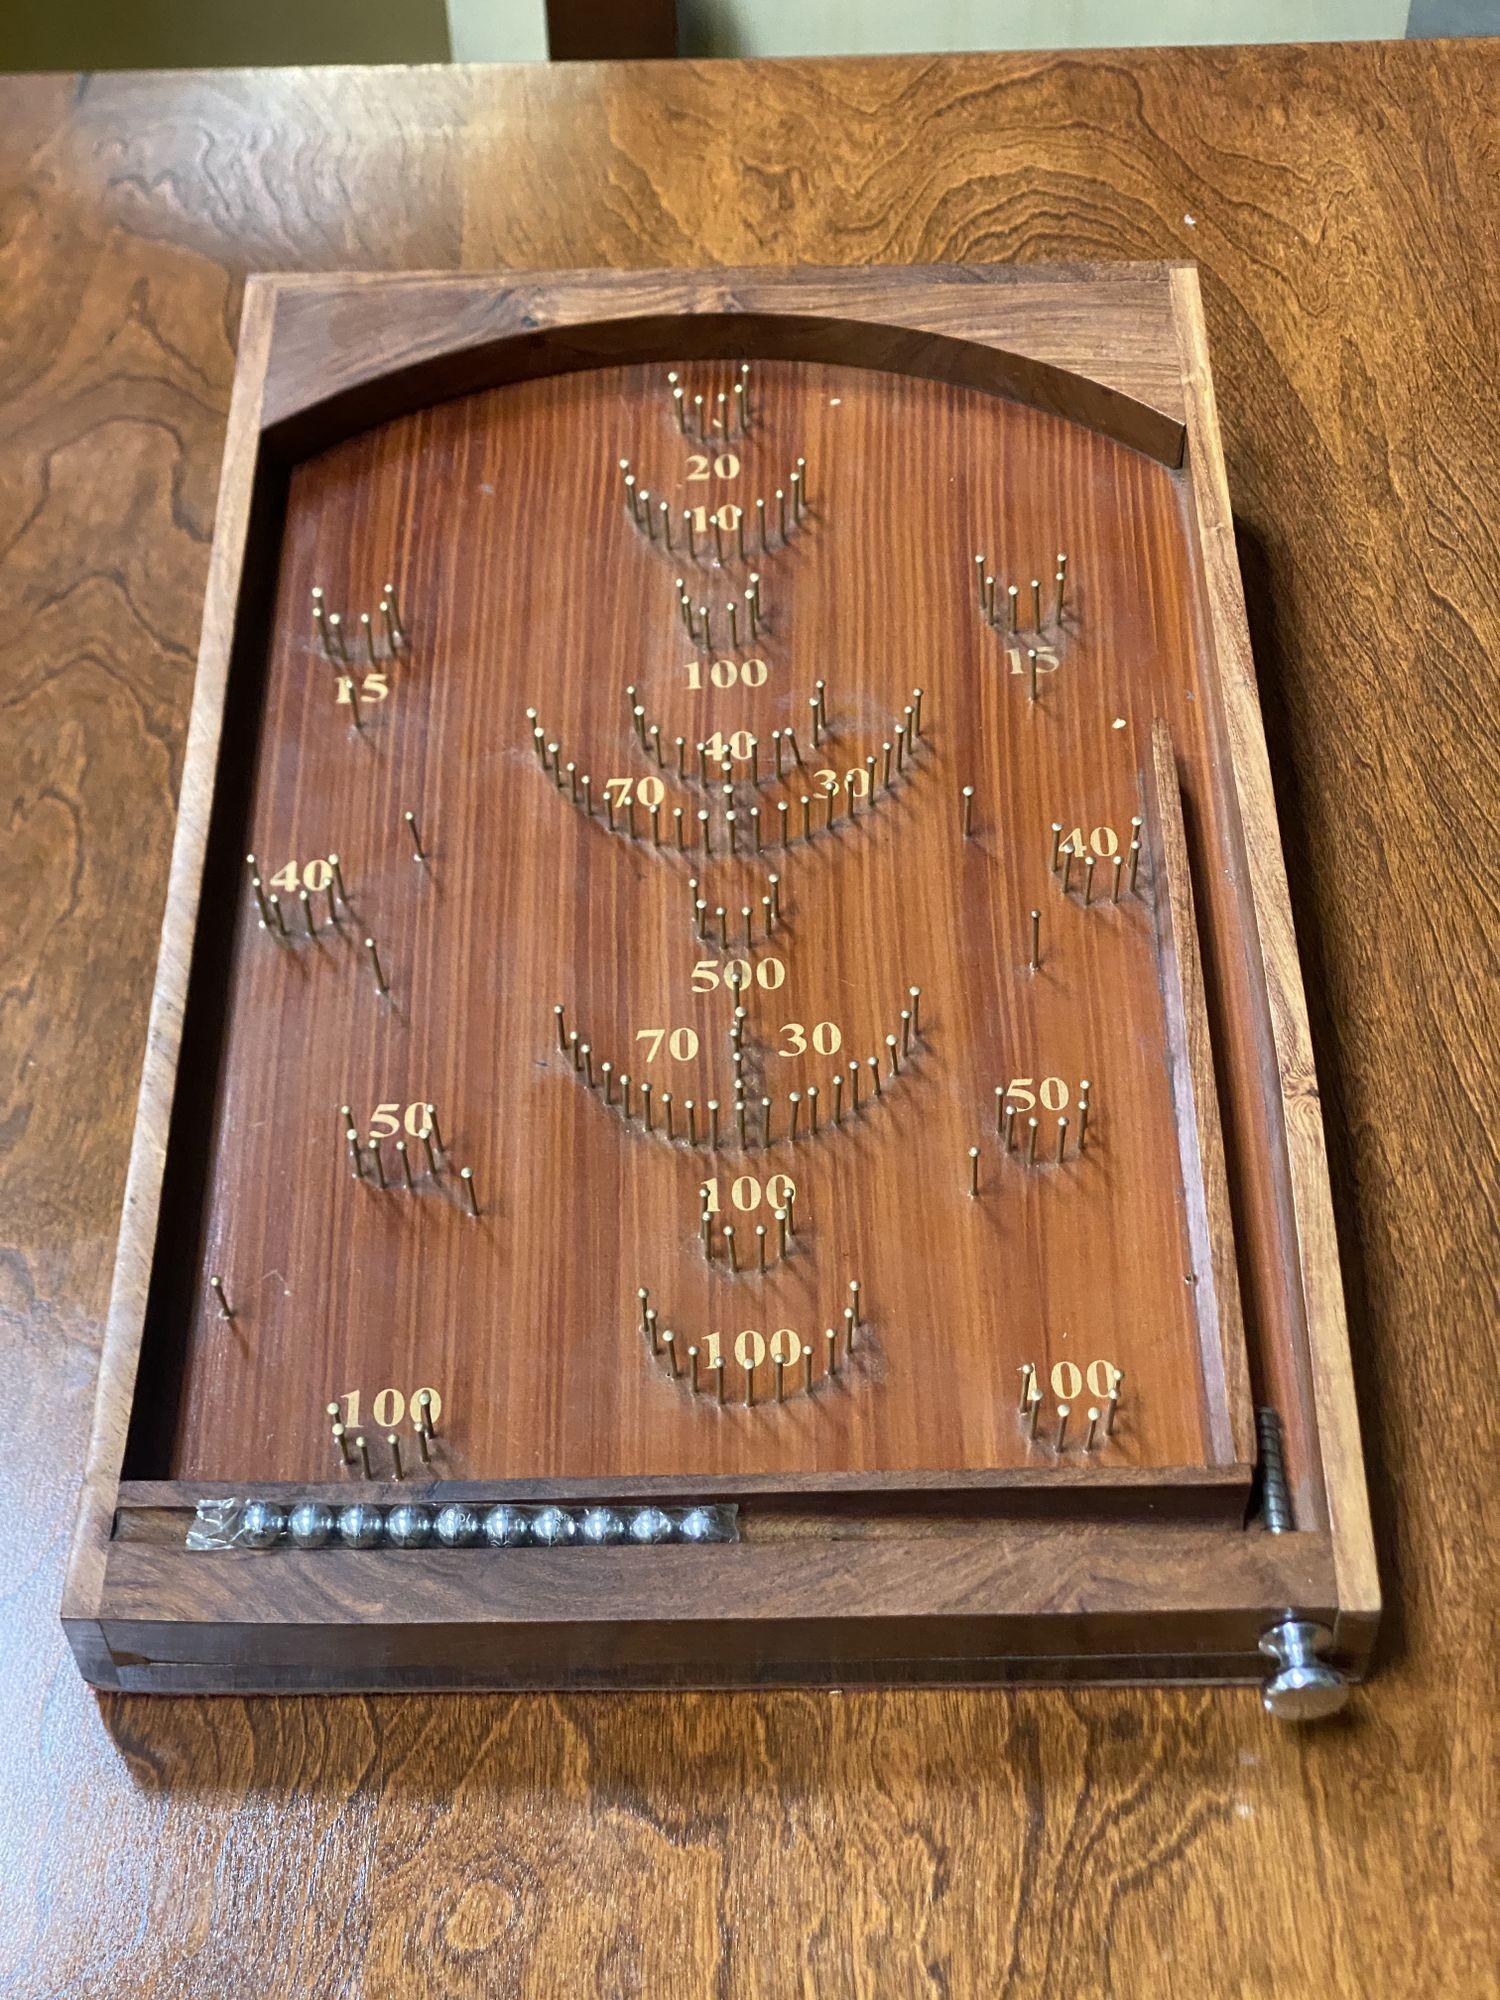 bagatelle game for sale